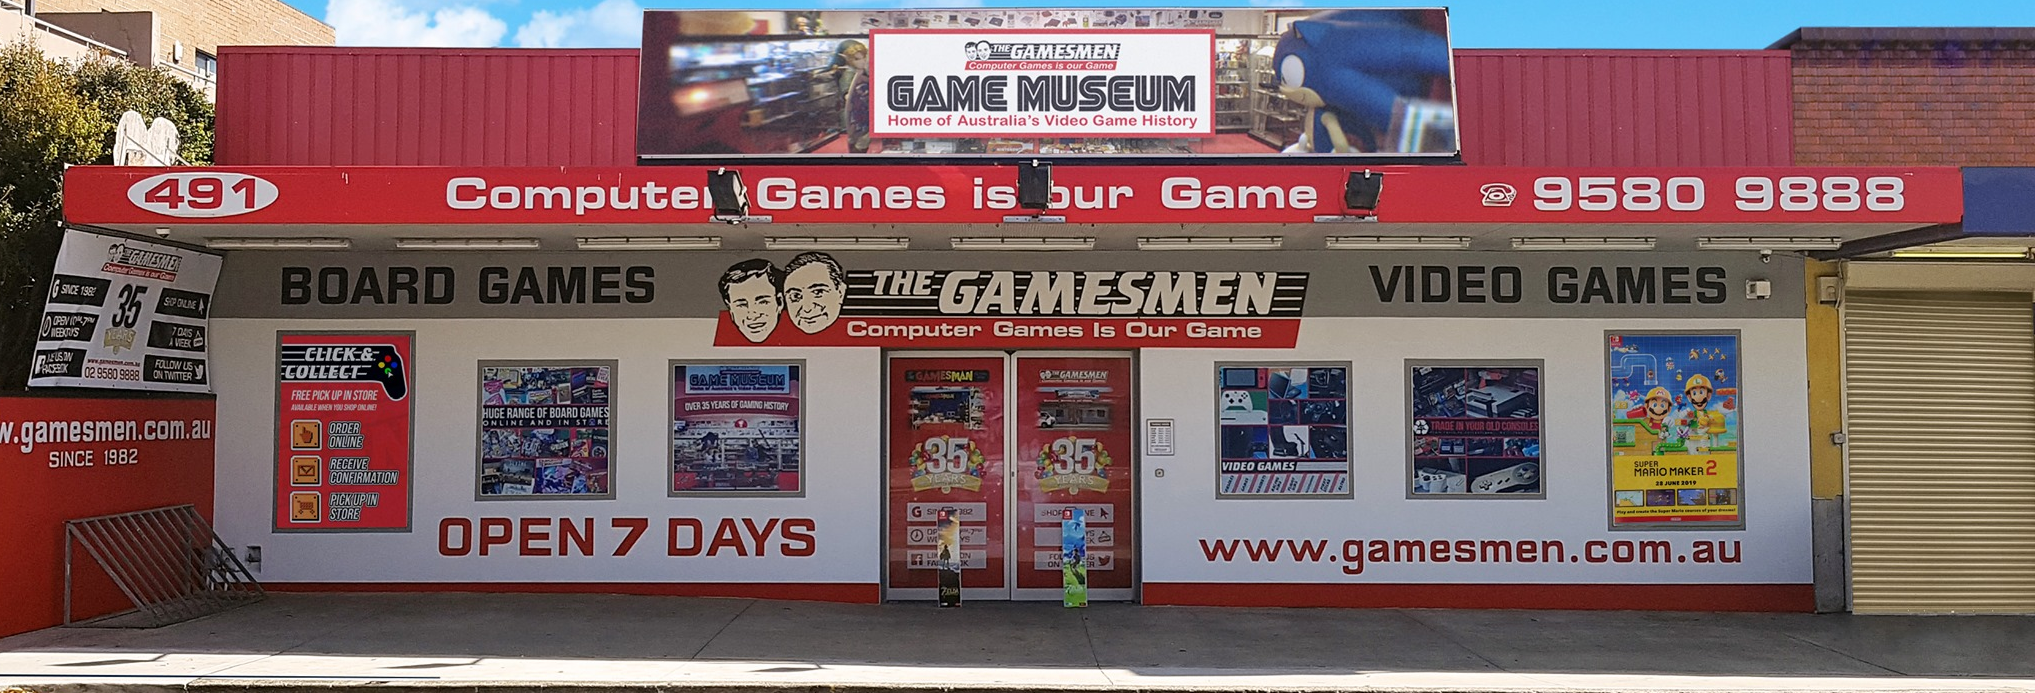 All The Gamesmen Deals & Promotions